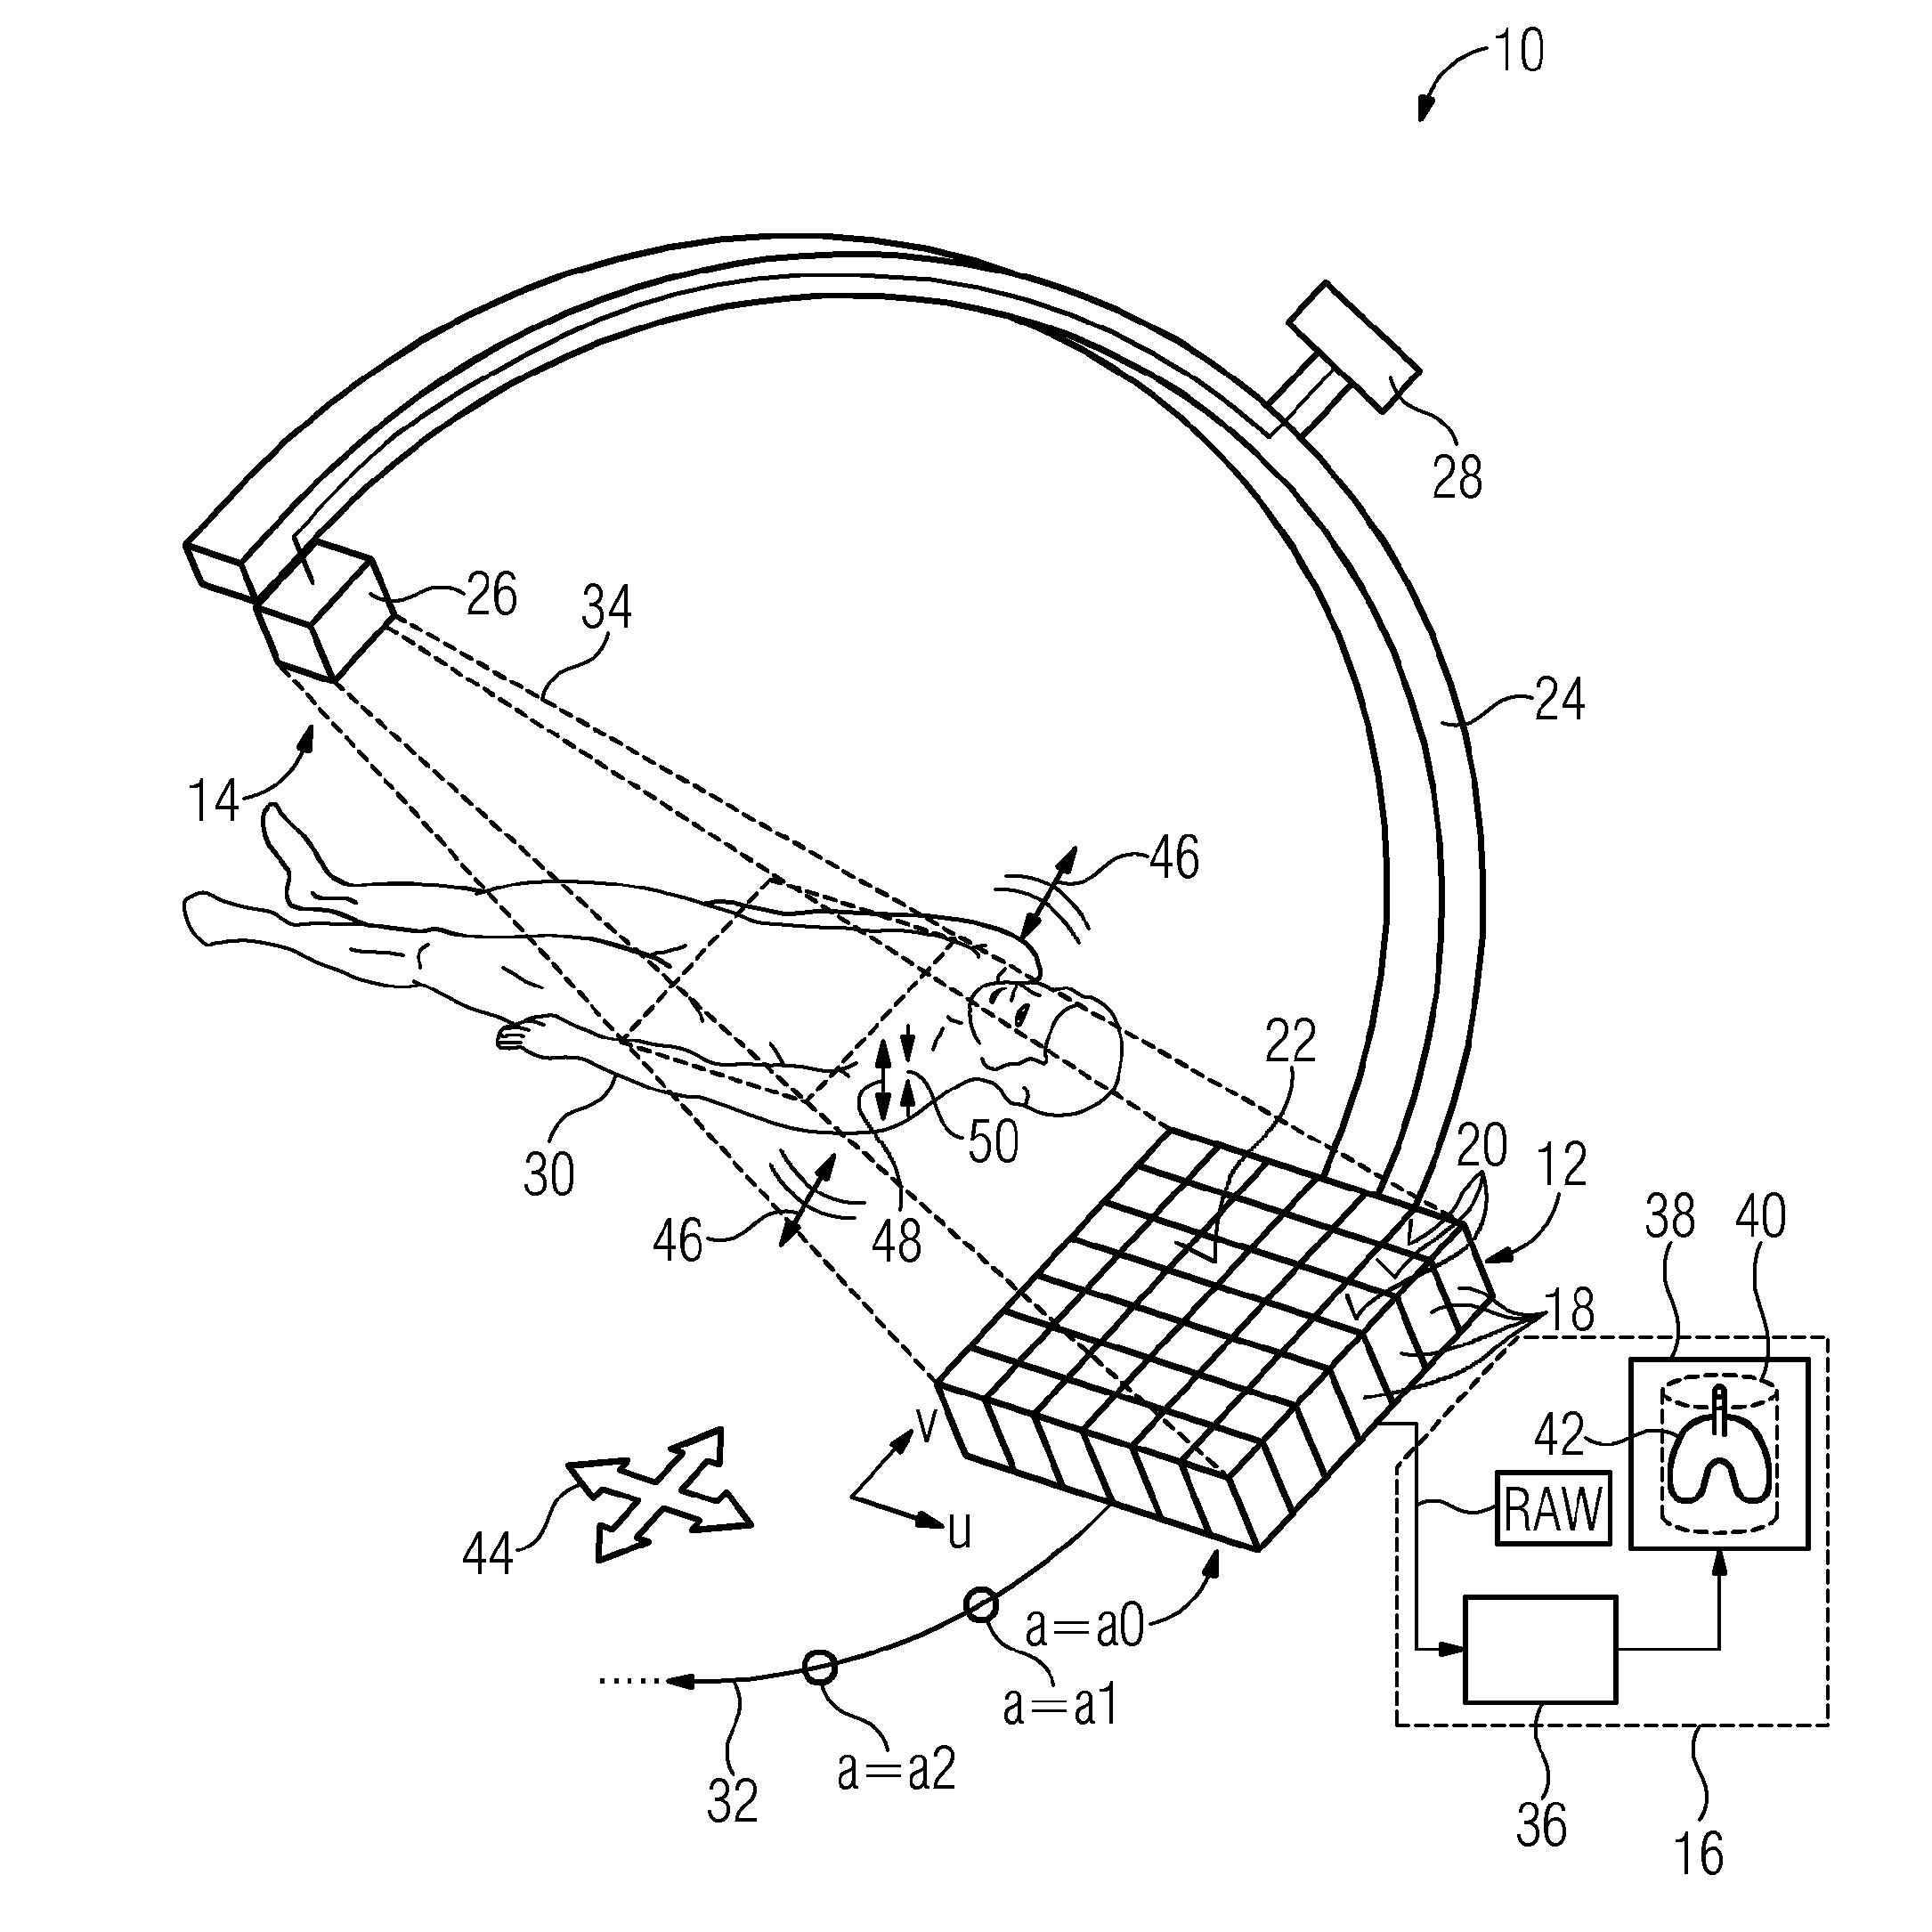 Computed tomography having motion compensation